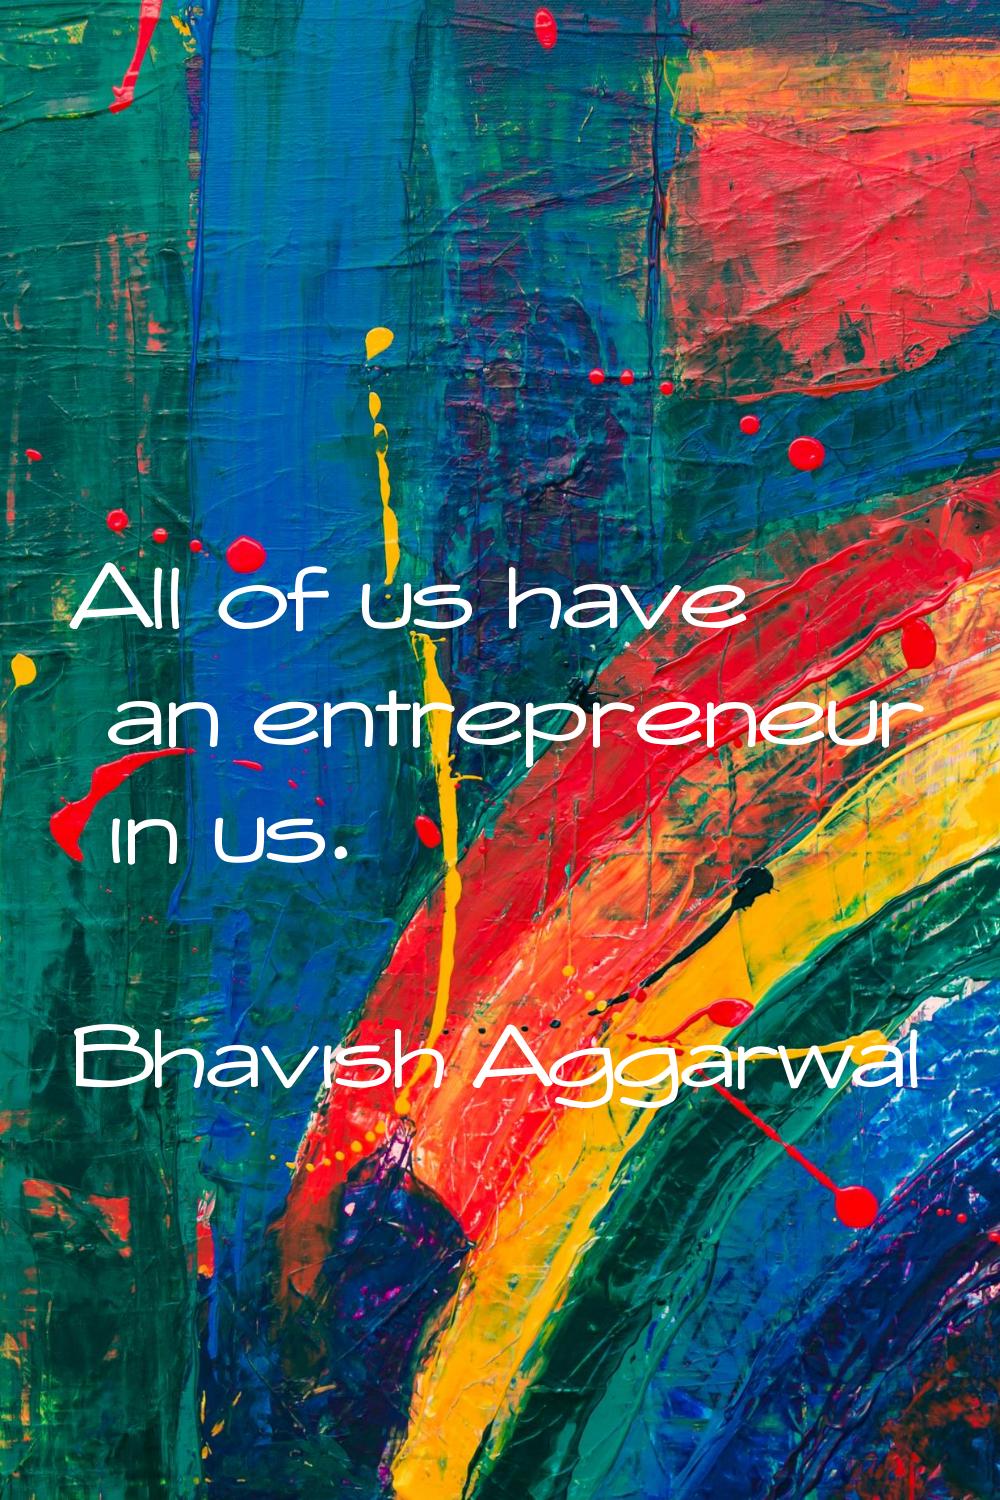 All of us have an entrepreneur in us.